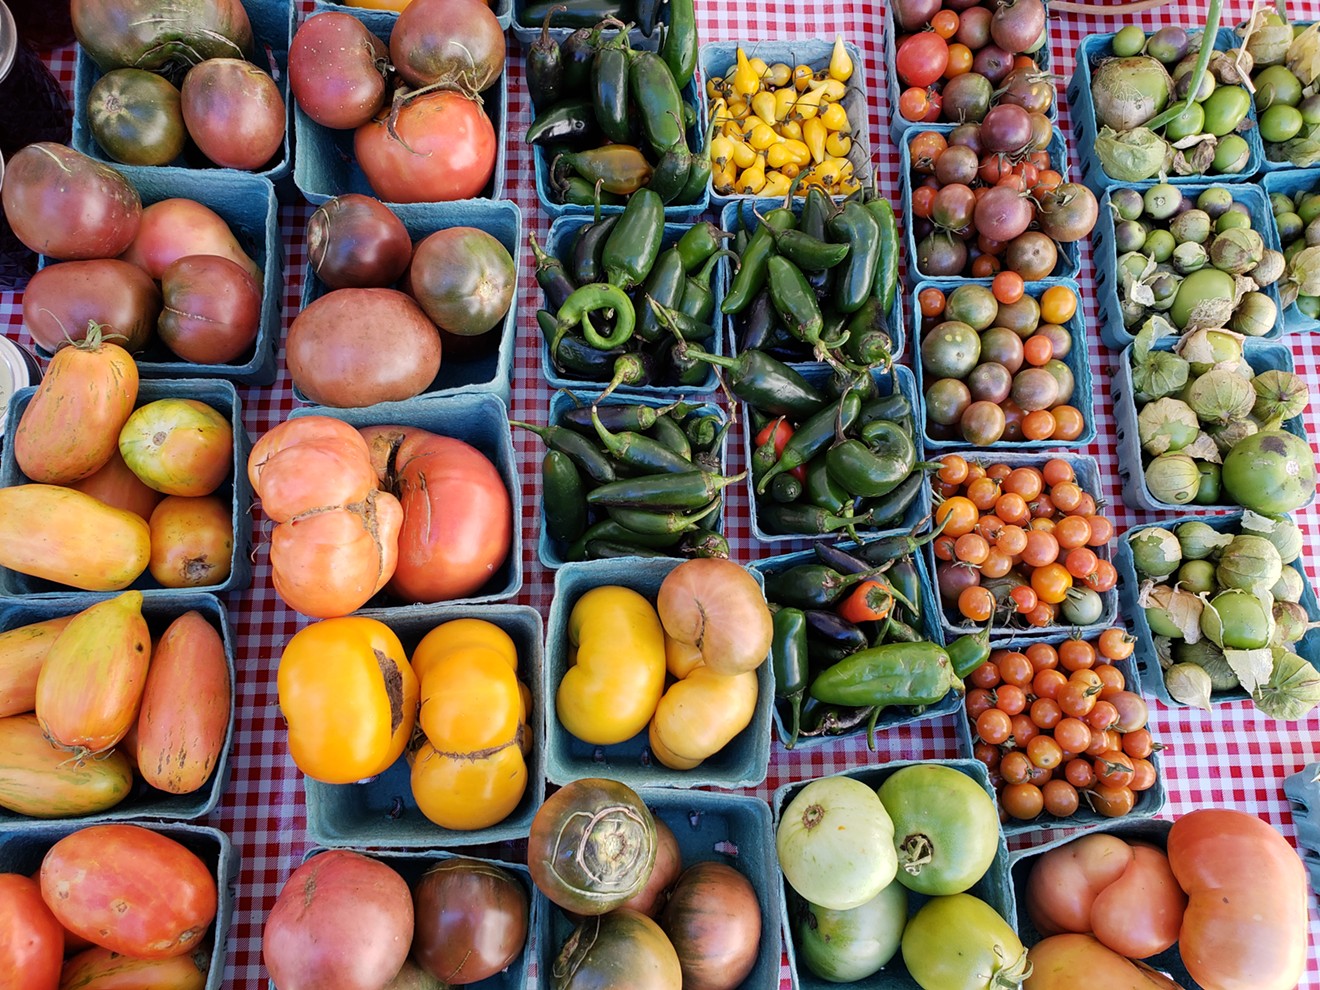 Union Station Farmers' Market opens this Saturday — with a special treat for moms.